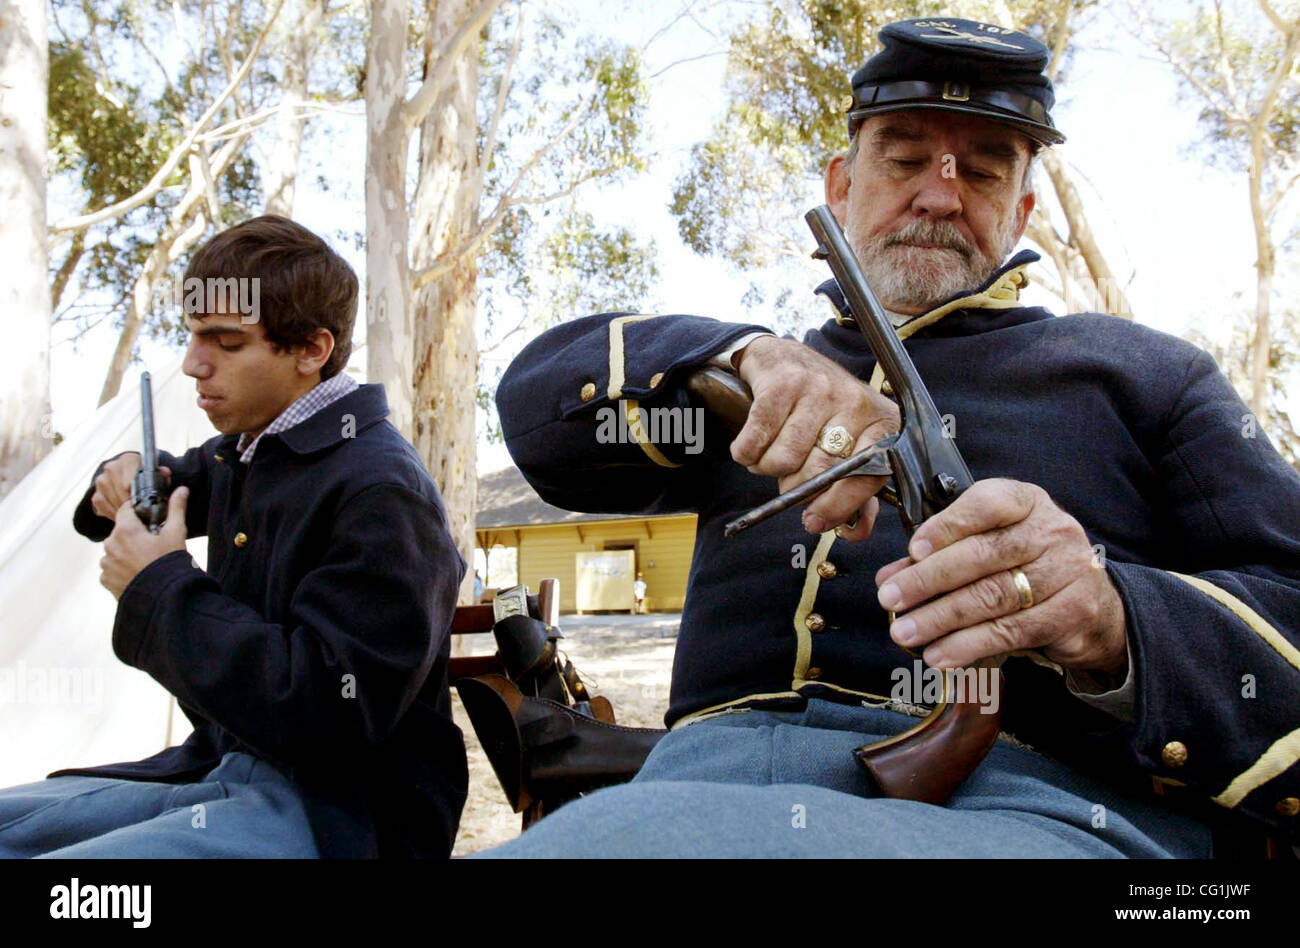 Union Army Civil War re-enactors Kevin Yarbrough, of Alameda, and Gil Hogue, of Sacramento, (LtoR) load their Colt Model 1860 Army revolvers in camp during Civil Wars Days, at Ardenwood Historic Farms, in Fremont, California, on Saturday August 18, 2007.  (Anda Chu/The Fremont Argus) Stock Photo